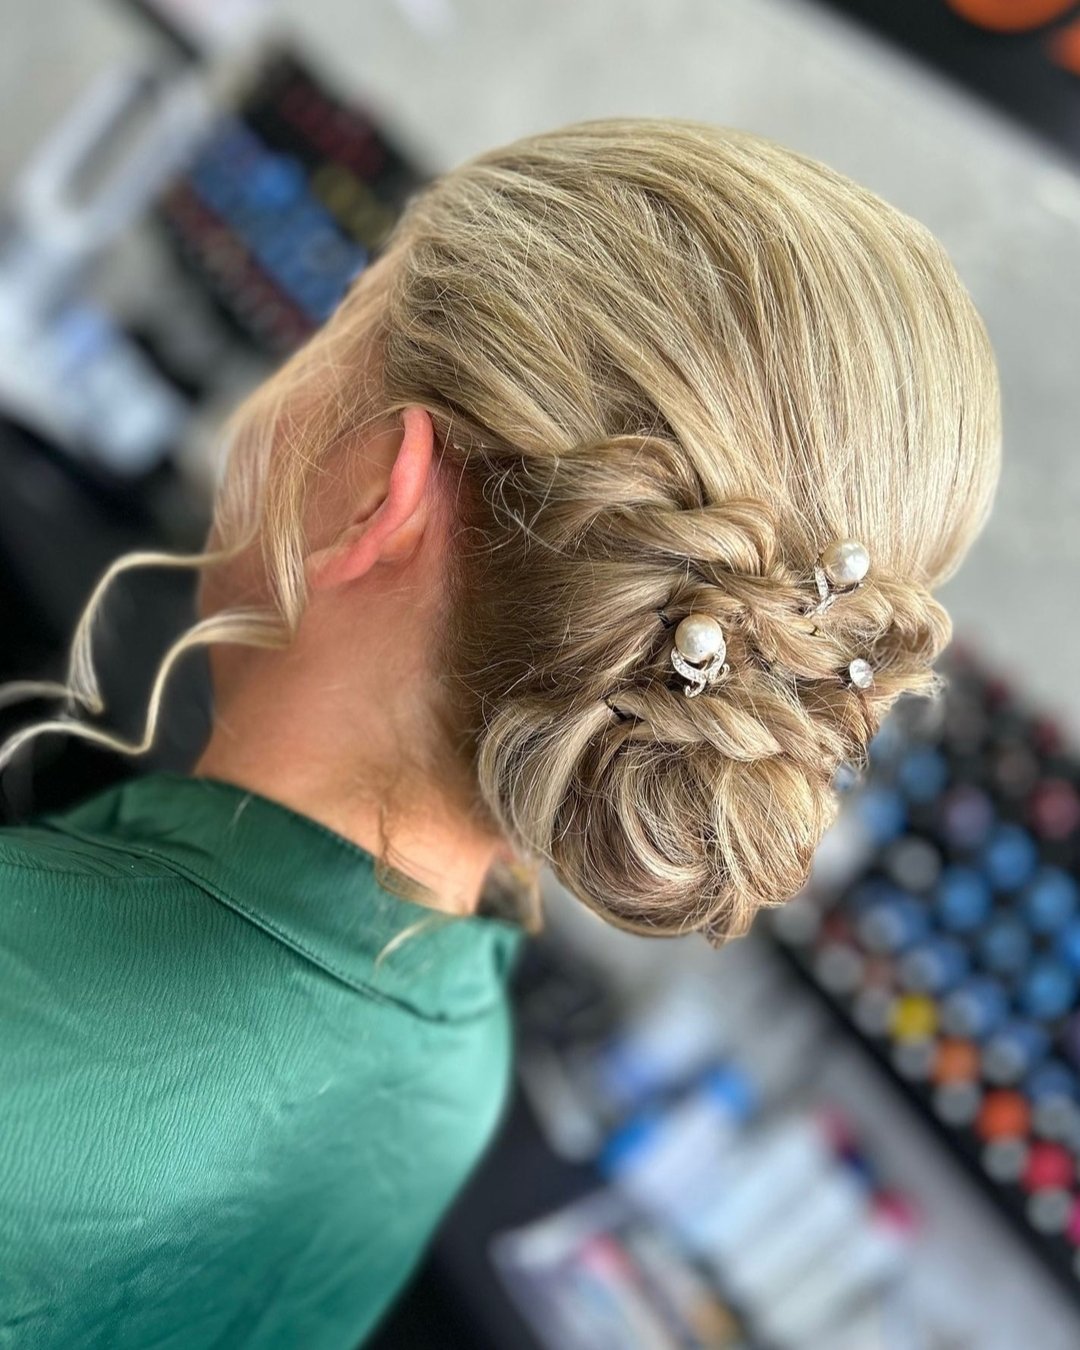 Gorgeous wedding up-do ✨

Our expert stylists will create a look that complements your unique beauty and style. Email pride@roarhairandbeauty.com to book your bridal consultation!

#BridalHairGoals #WeddingReady #RoarHairandBeauty #GlasgowSalon